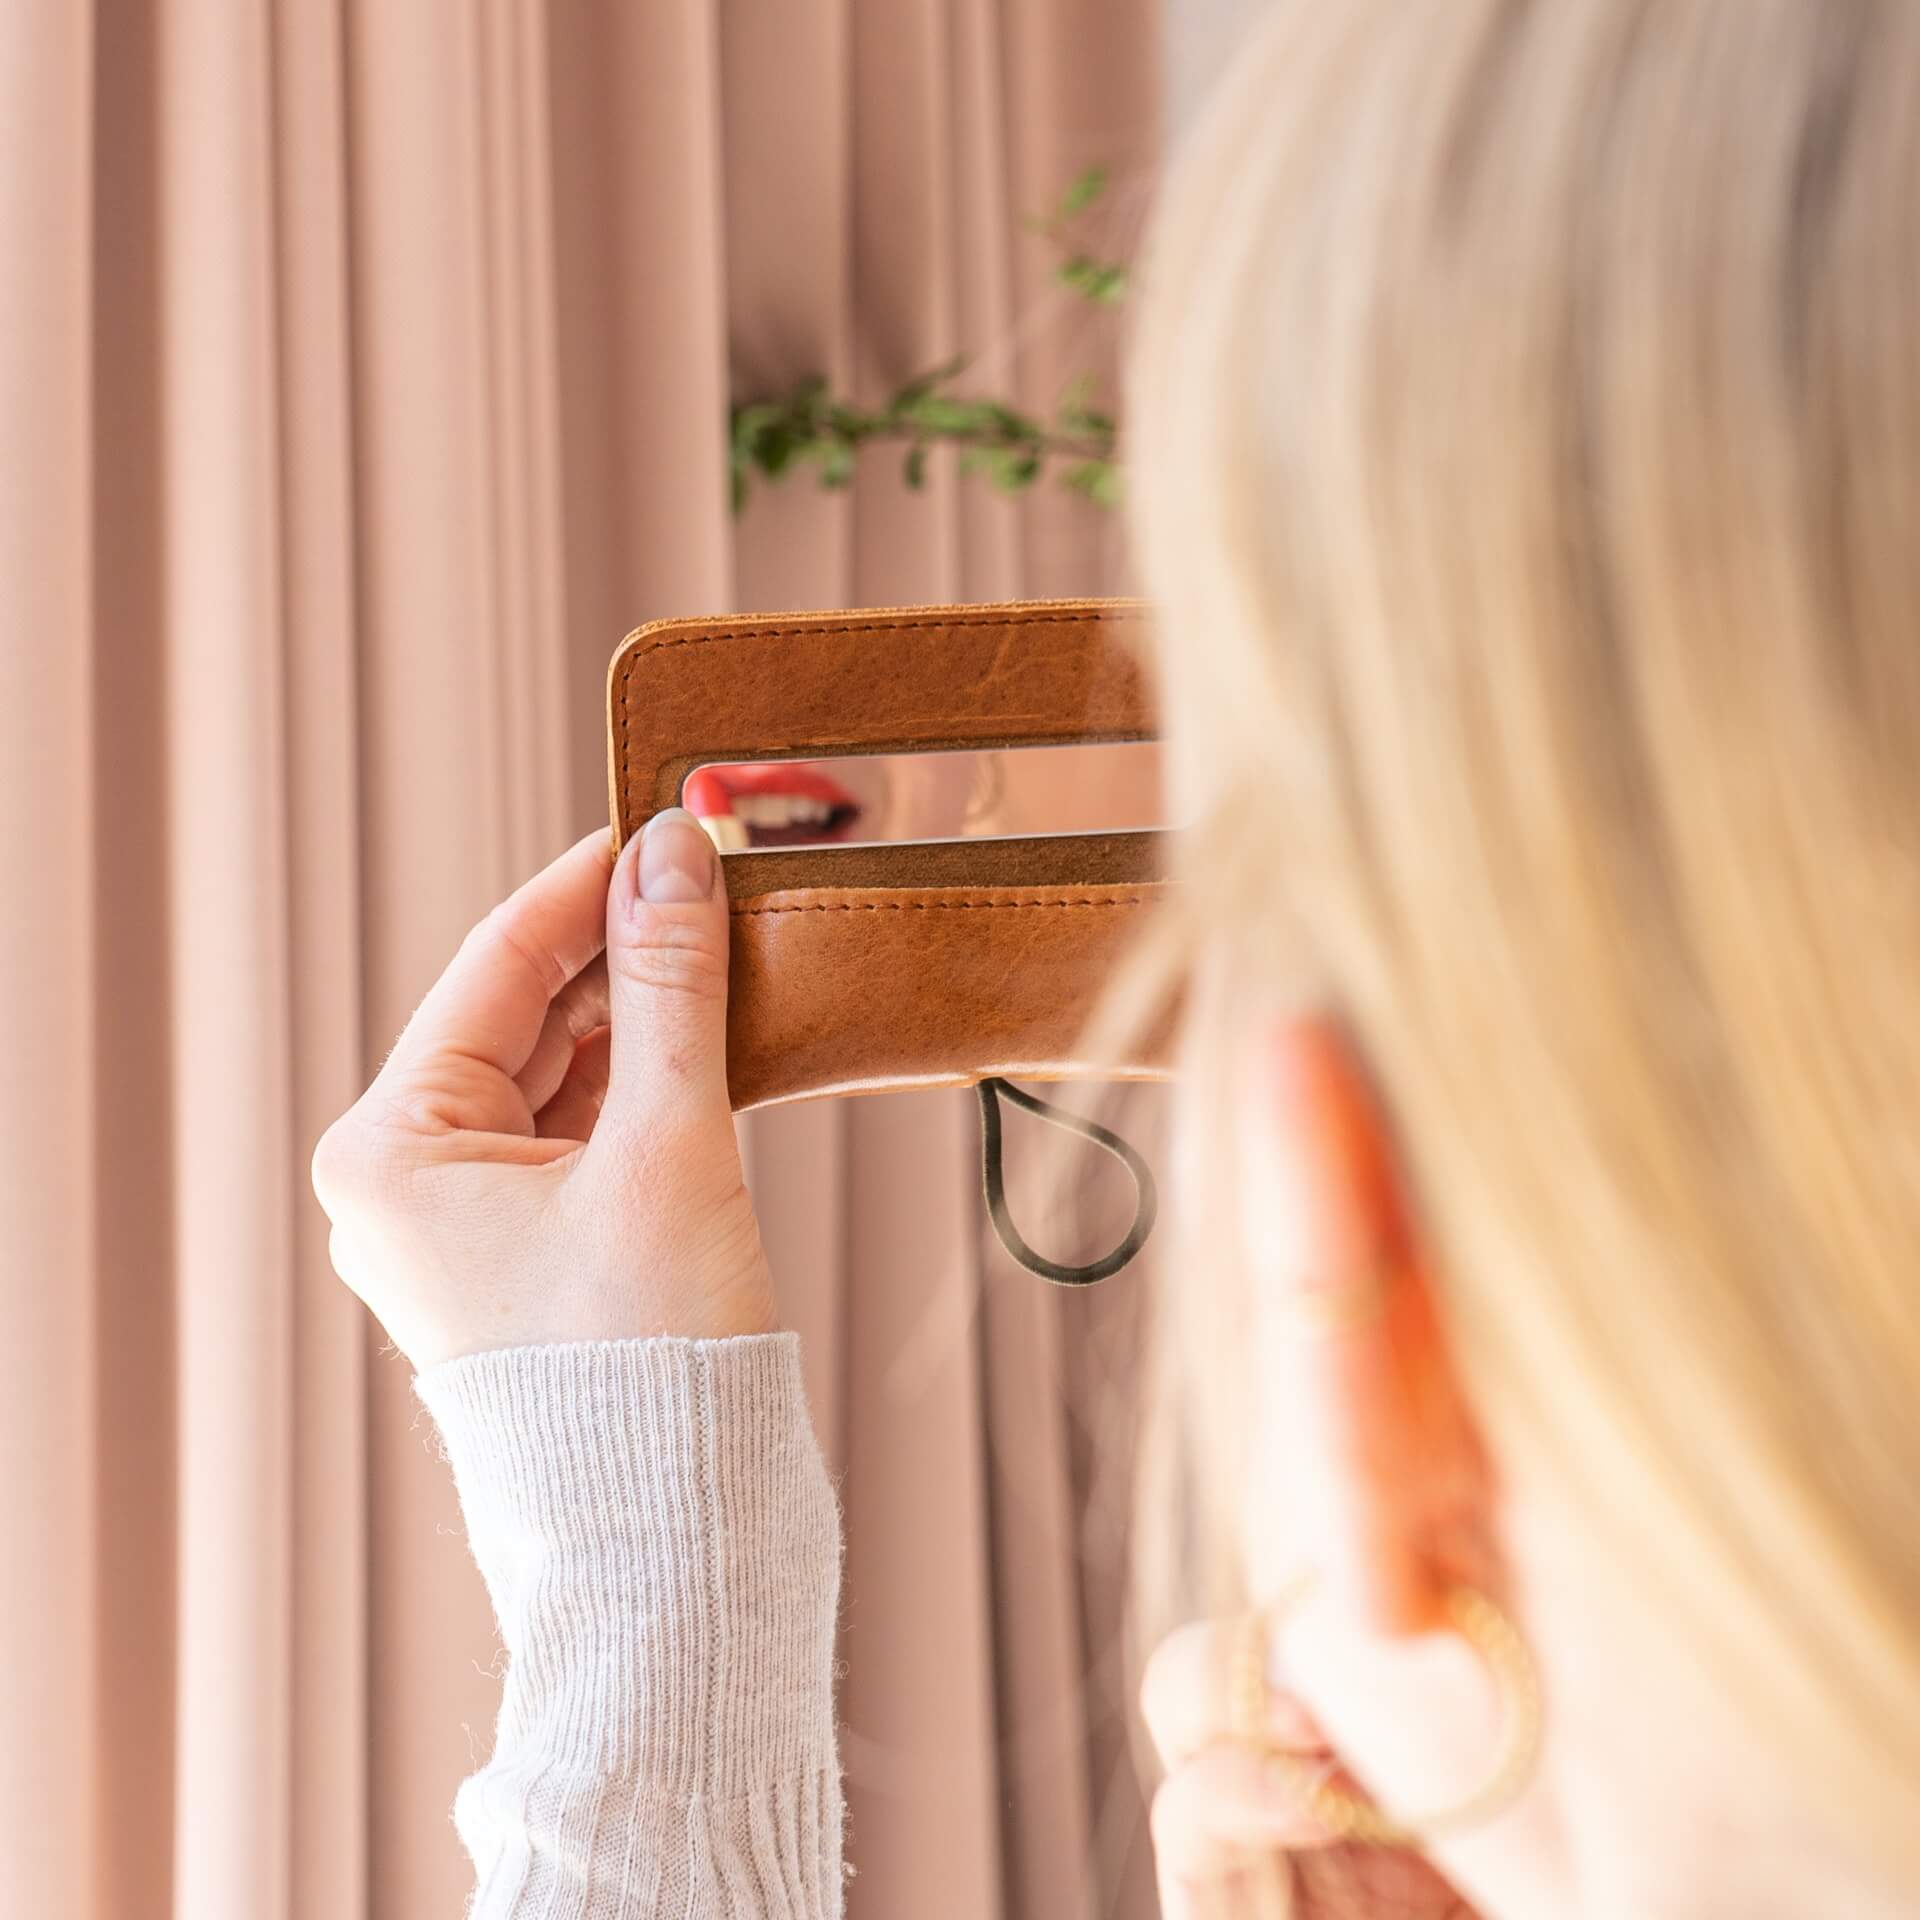 Our lipstick case is a practical add-on for on the go.